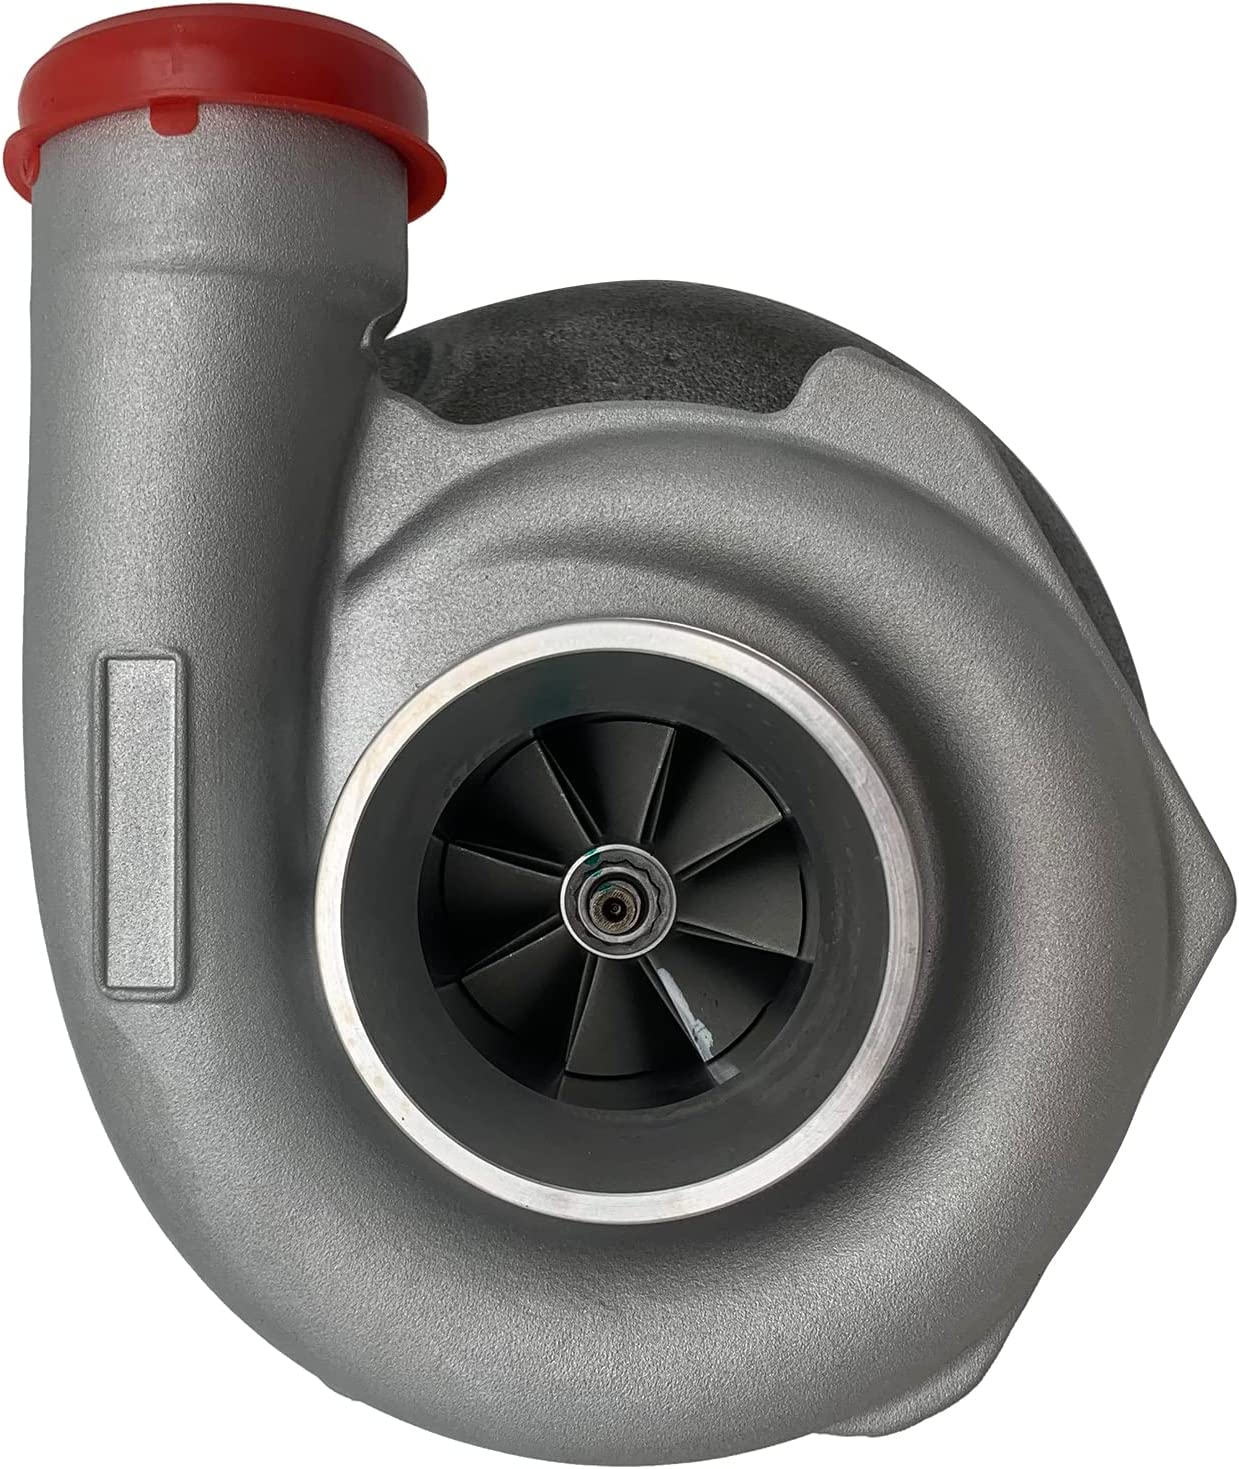 Seapple Turbocharger 4N6859 4N-6859 Compatible with Caterpillar D4E 950 930 518 Skidder 3304 - image 5 of 6